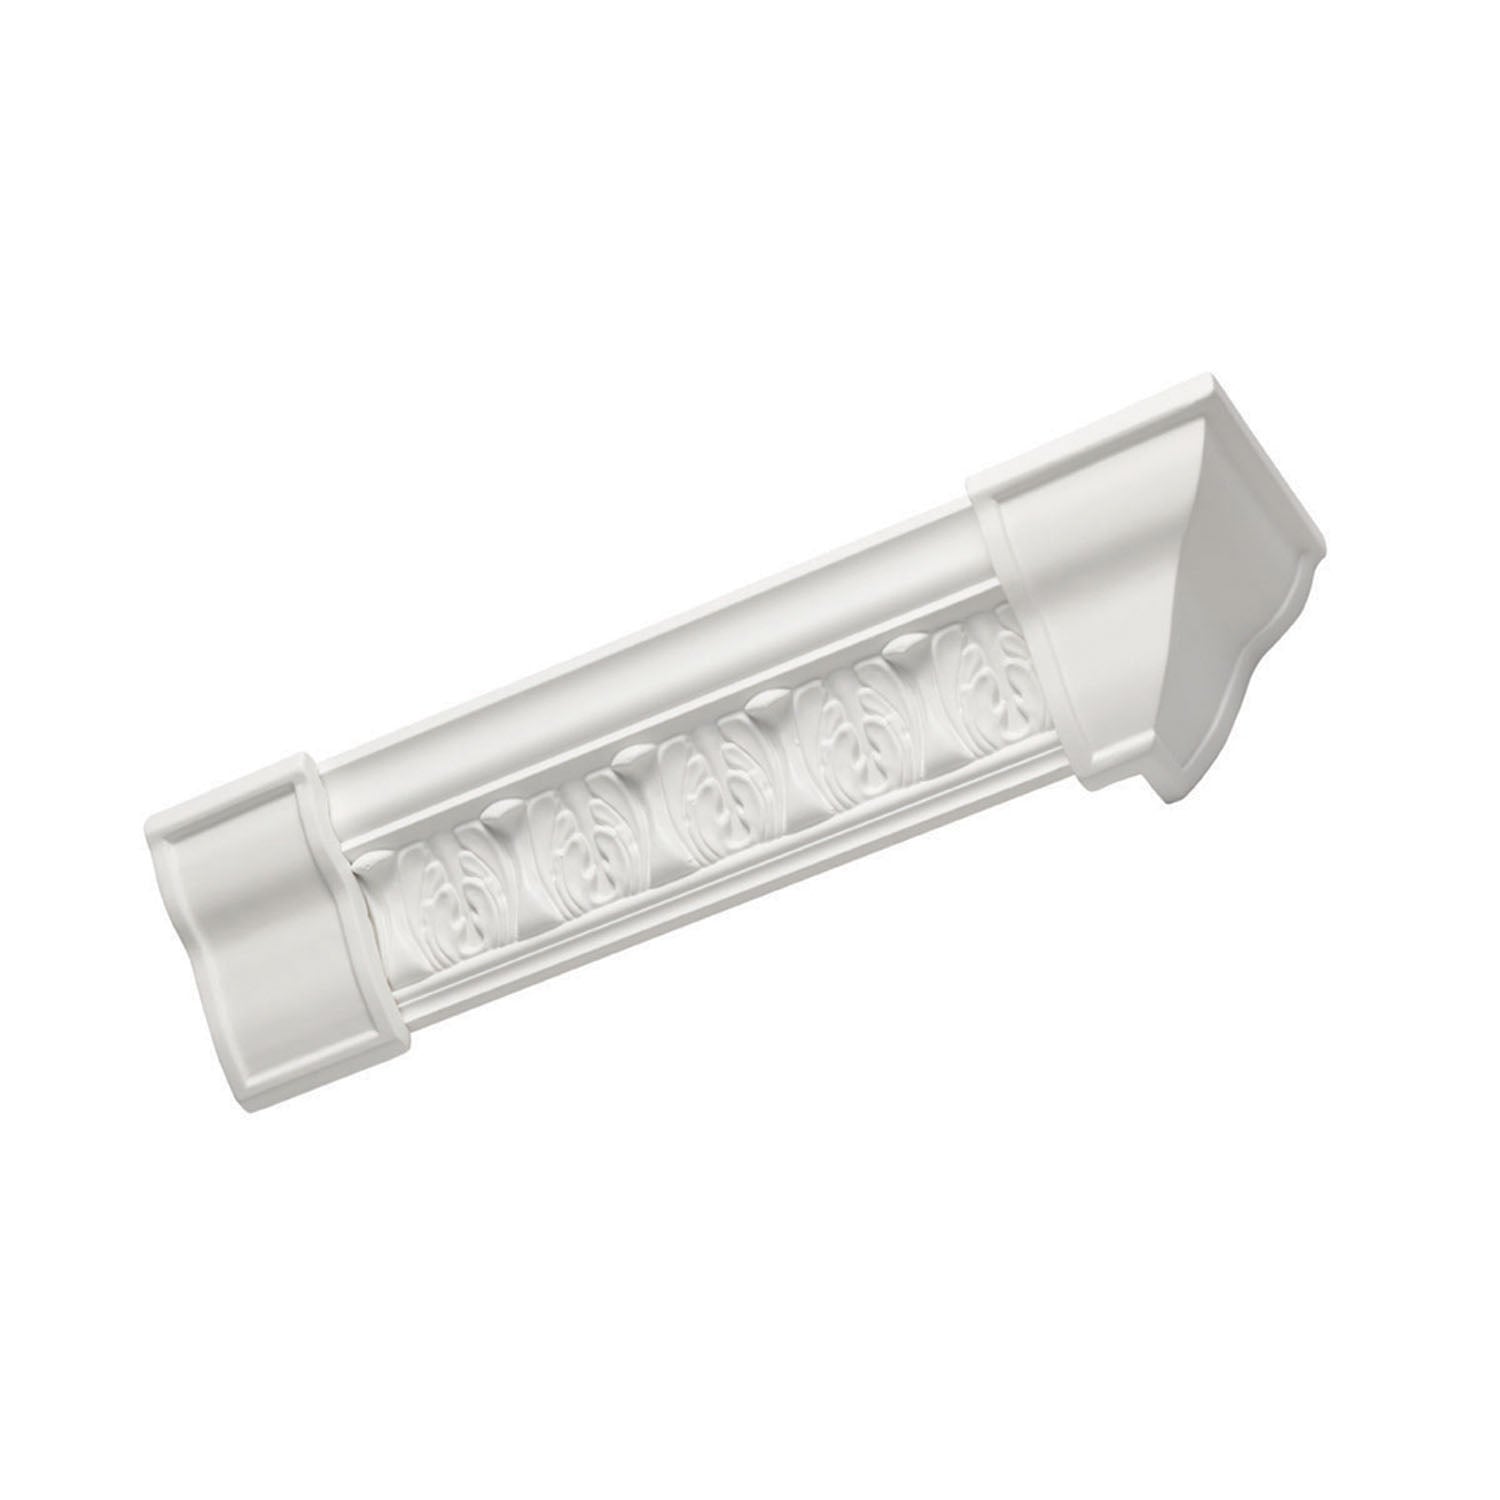 Focal Point Lighting 22453 Accessories Anthenian Leaves Connector- 4 1/8 Decor White